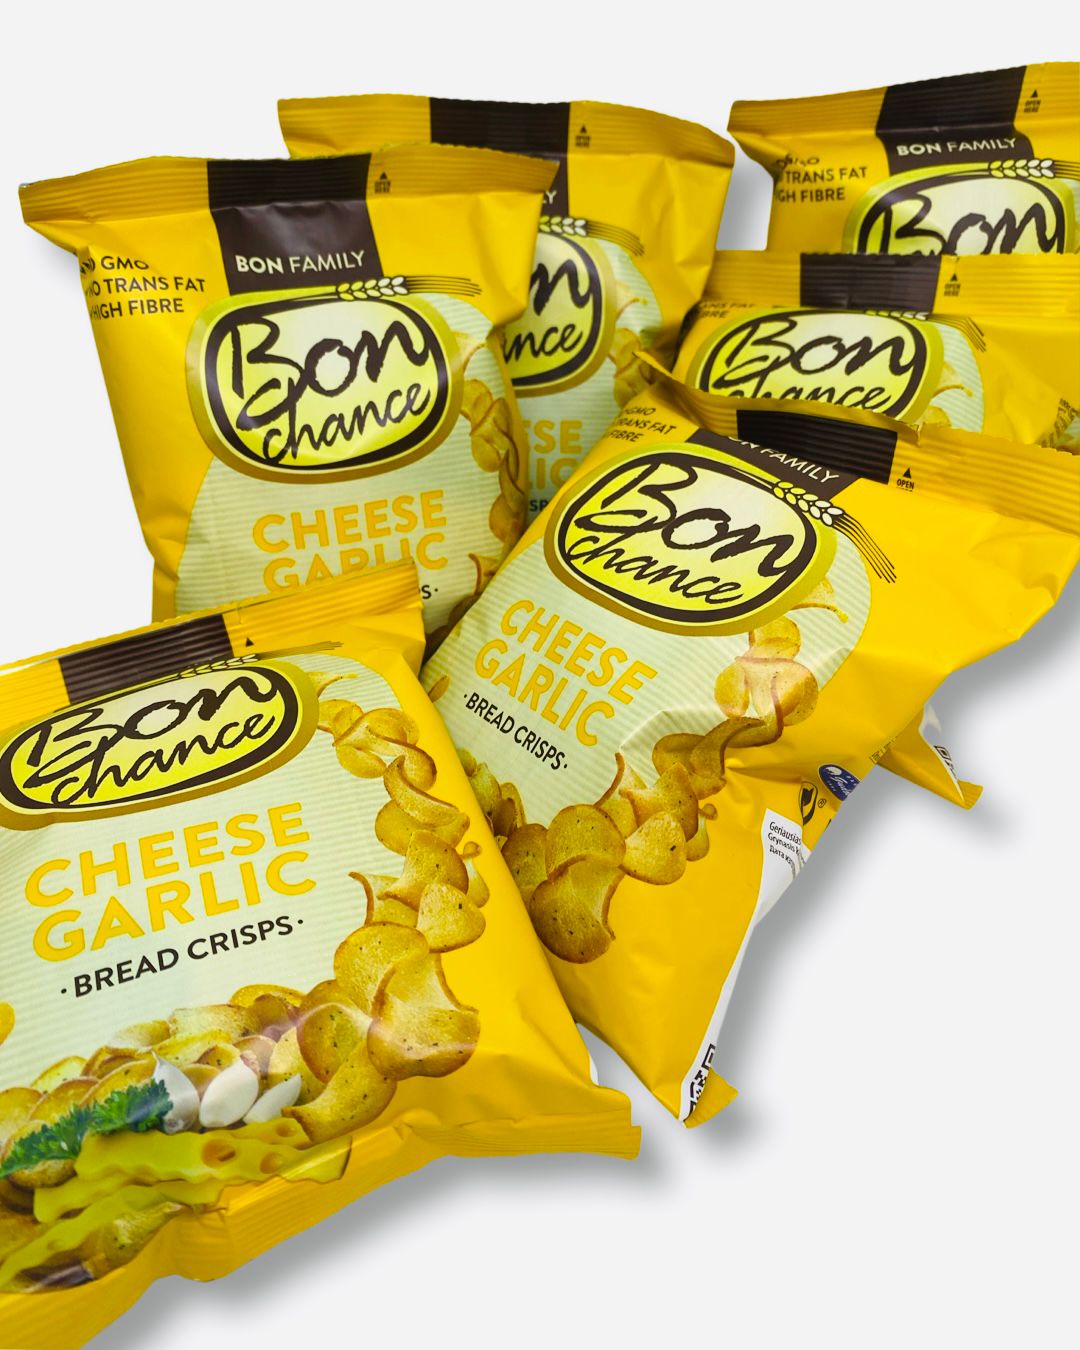 Bon chance With cheese and garlic seasoning mix Bread Crisps - Snack for Sharing with Friends - 60 grams